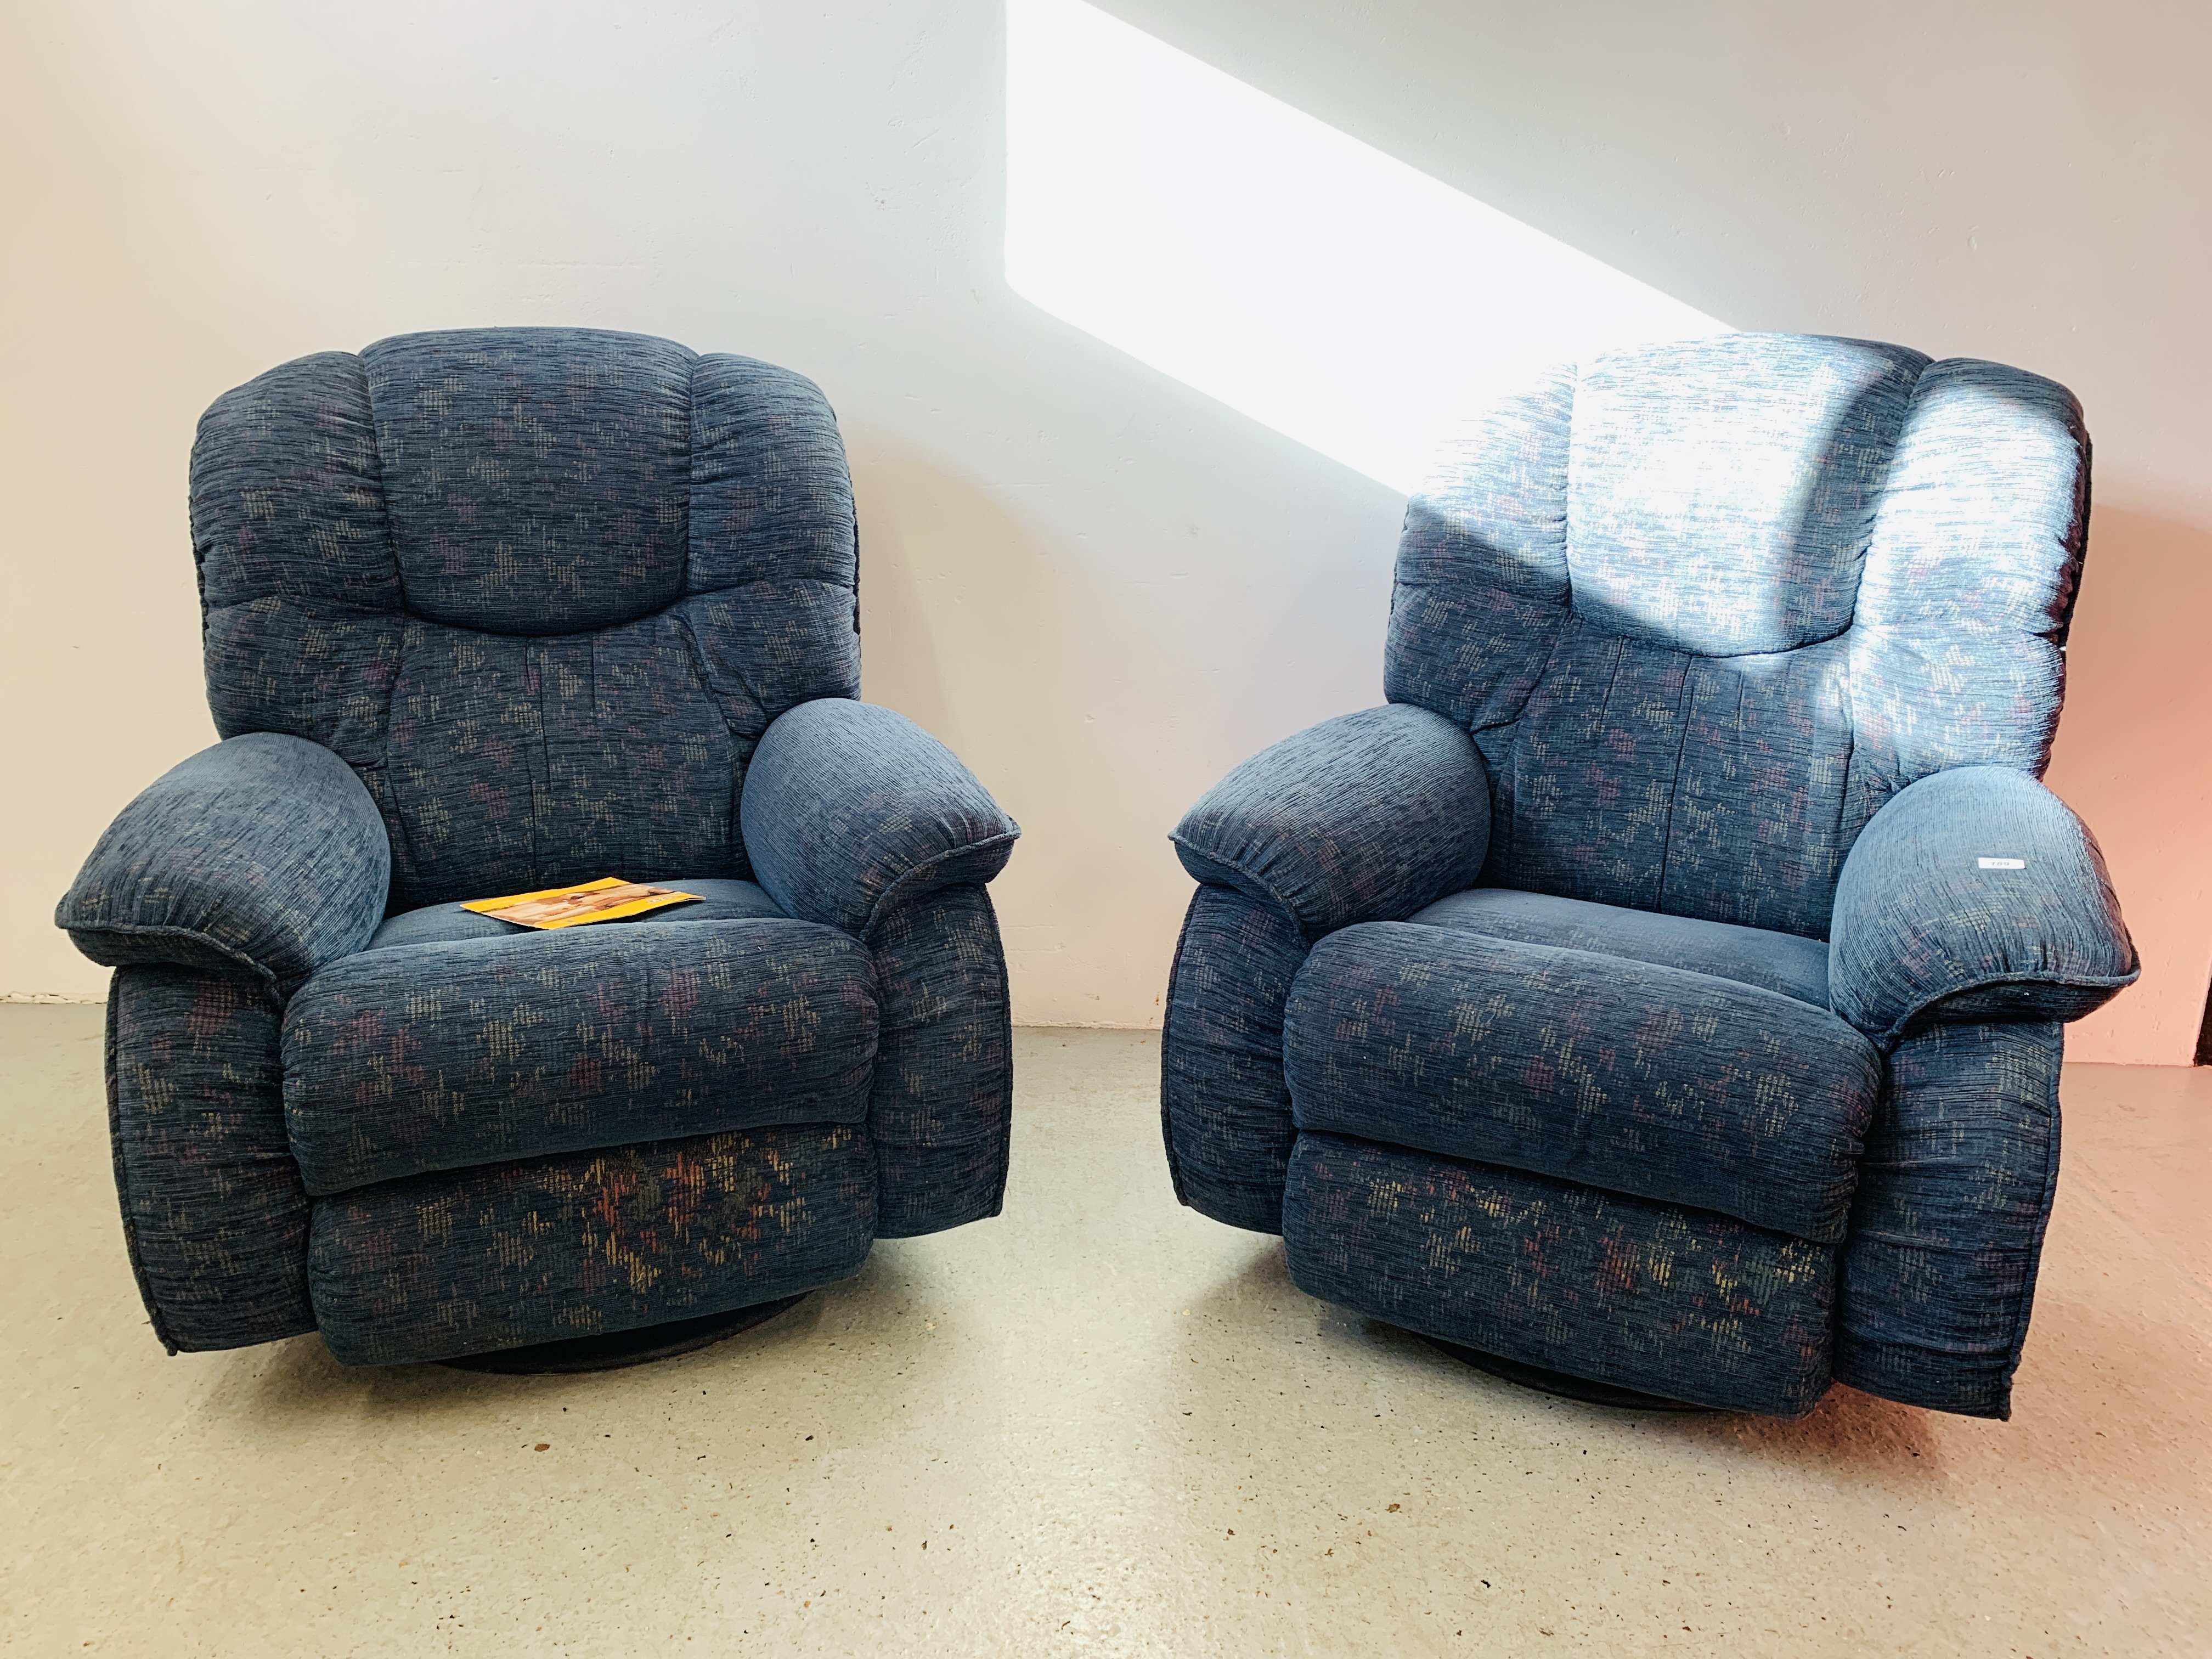 A PAIR OF LA-Z-BOY BLUE UPHOLSTERED SWIVEL RECLINER EASY CHAIRS